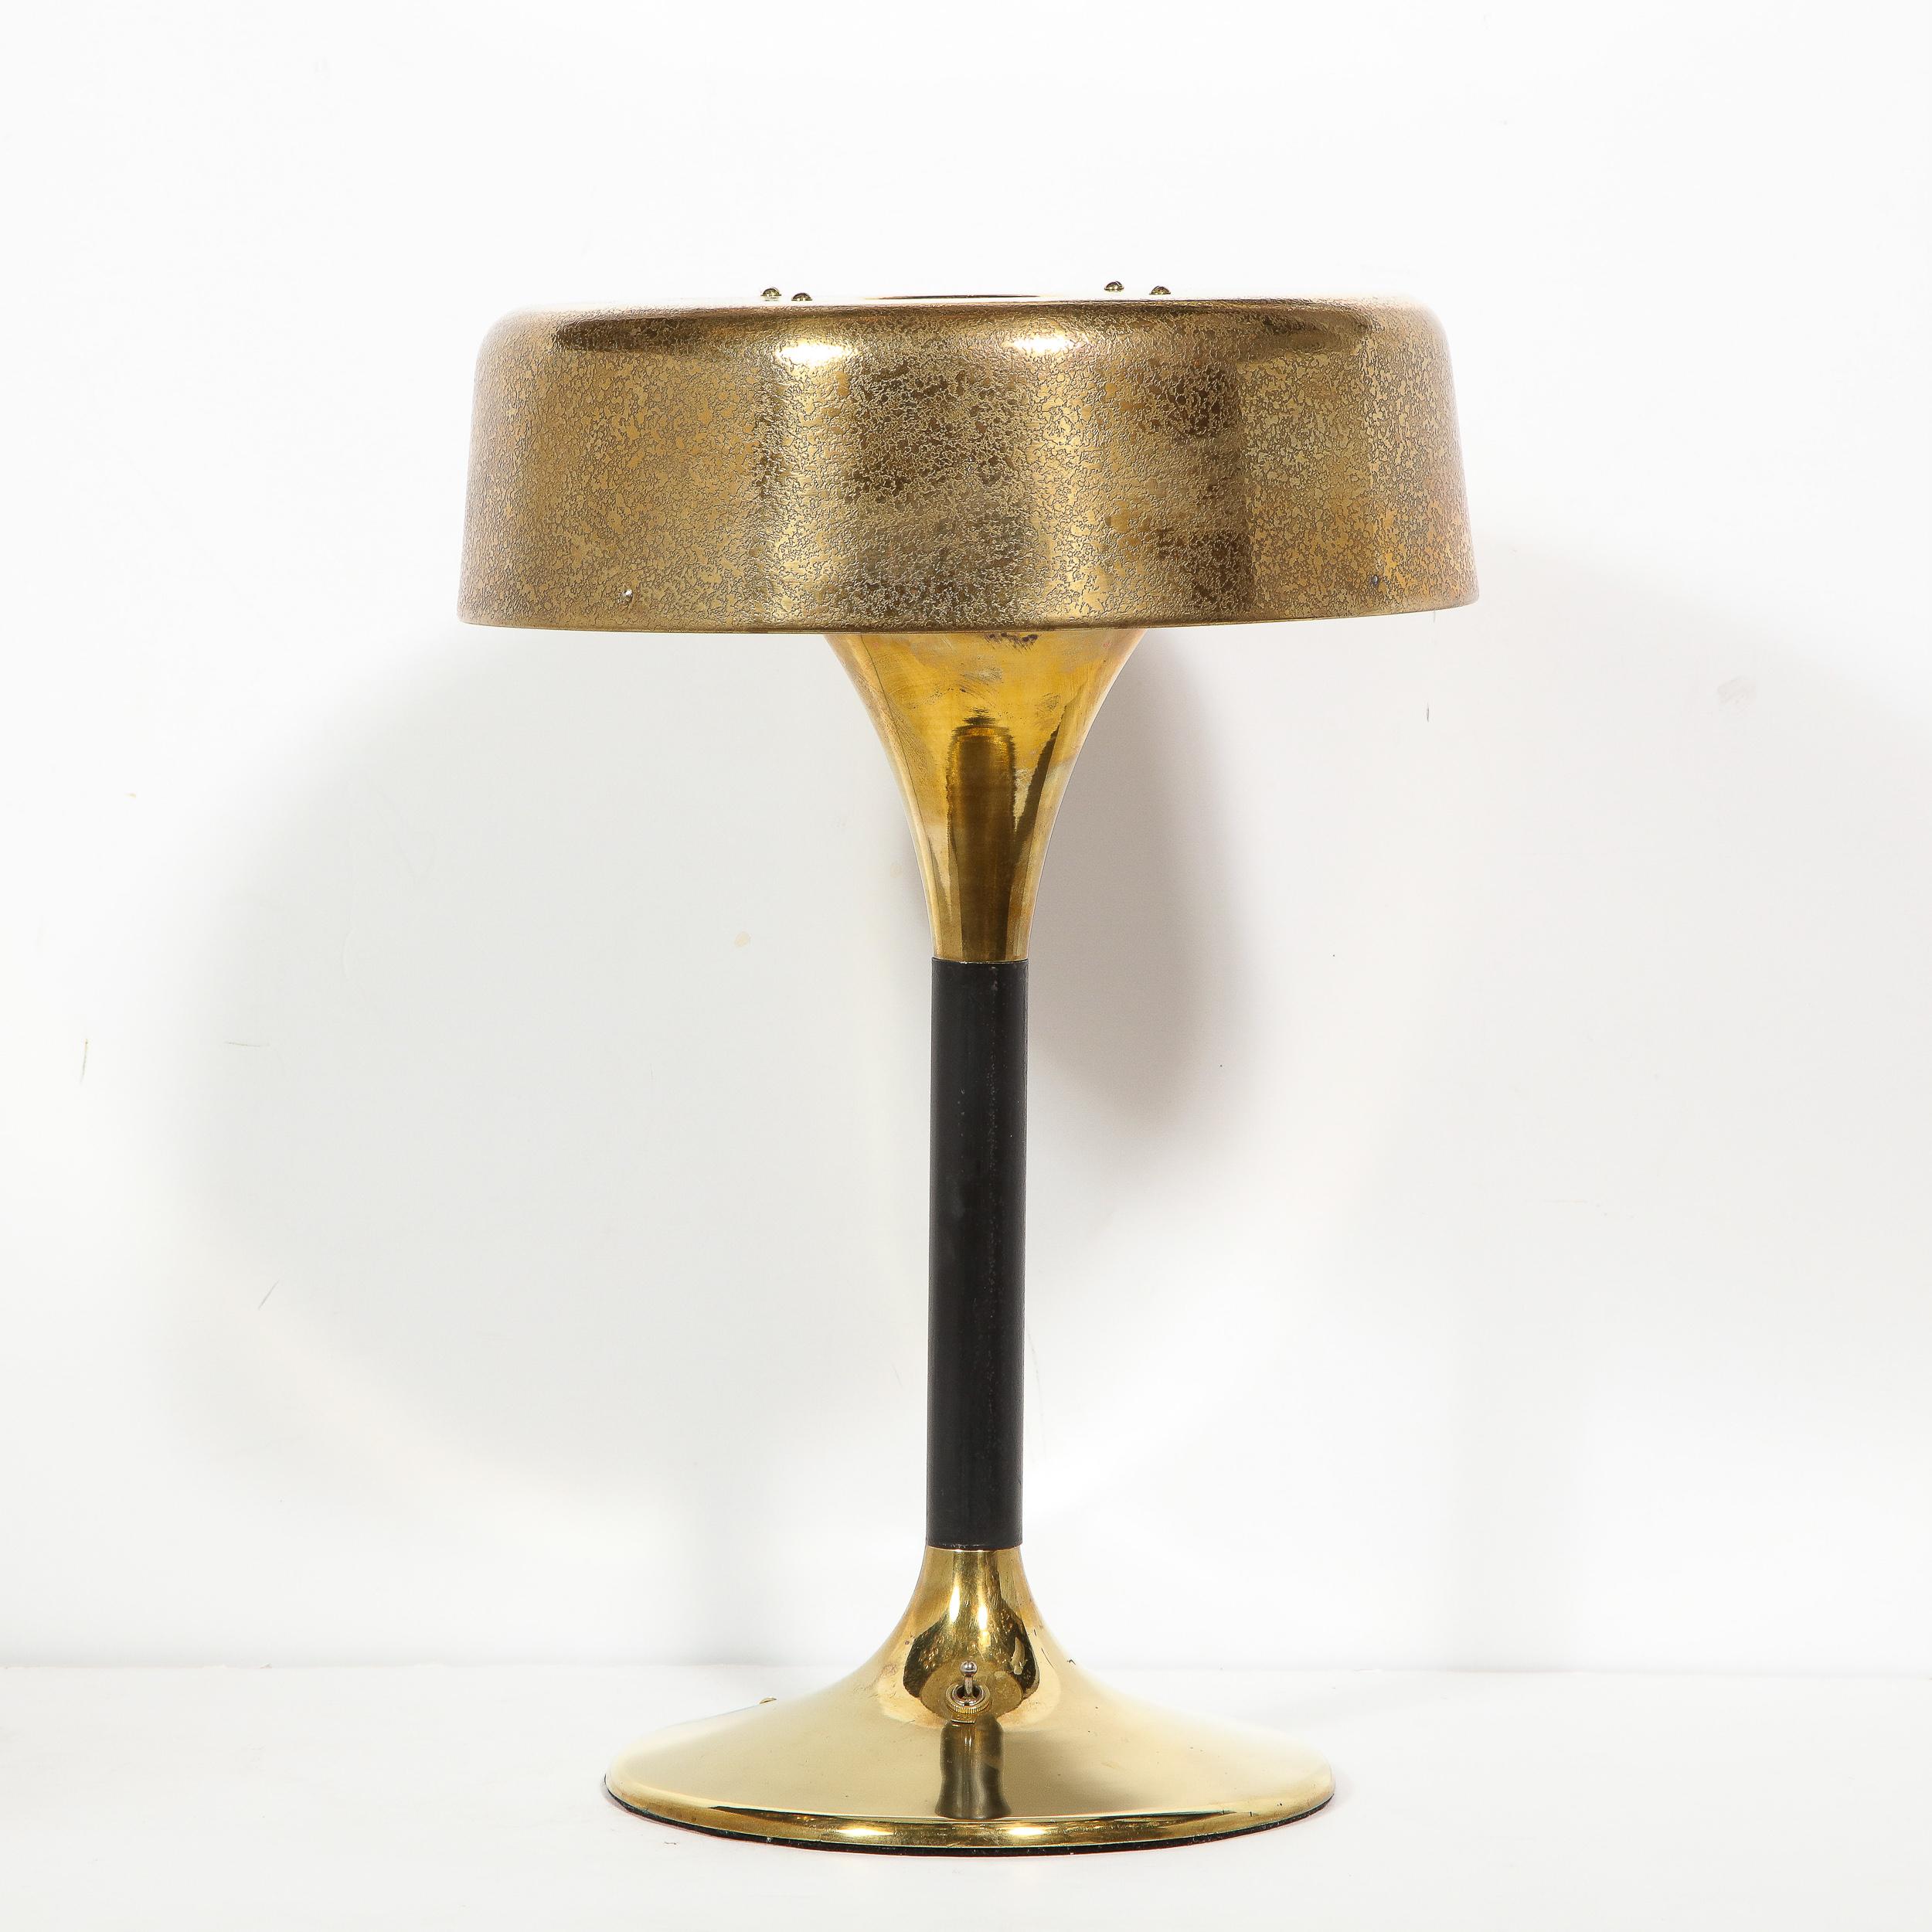 This elegant Mid-Century Modern table lamp was realized in the United States, circa 1950. It features a domed base in polished brass; a cylindrical stem clad in black lacquer; an inverse domed neck in brass; and a volumetric cylindrical shade in